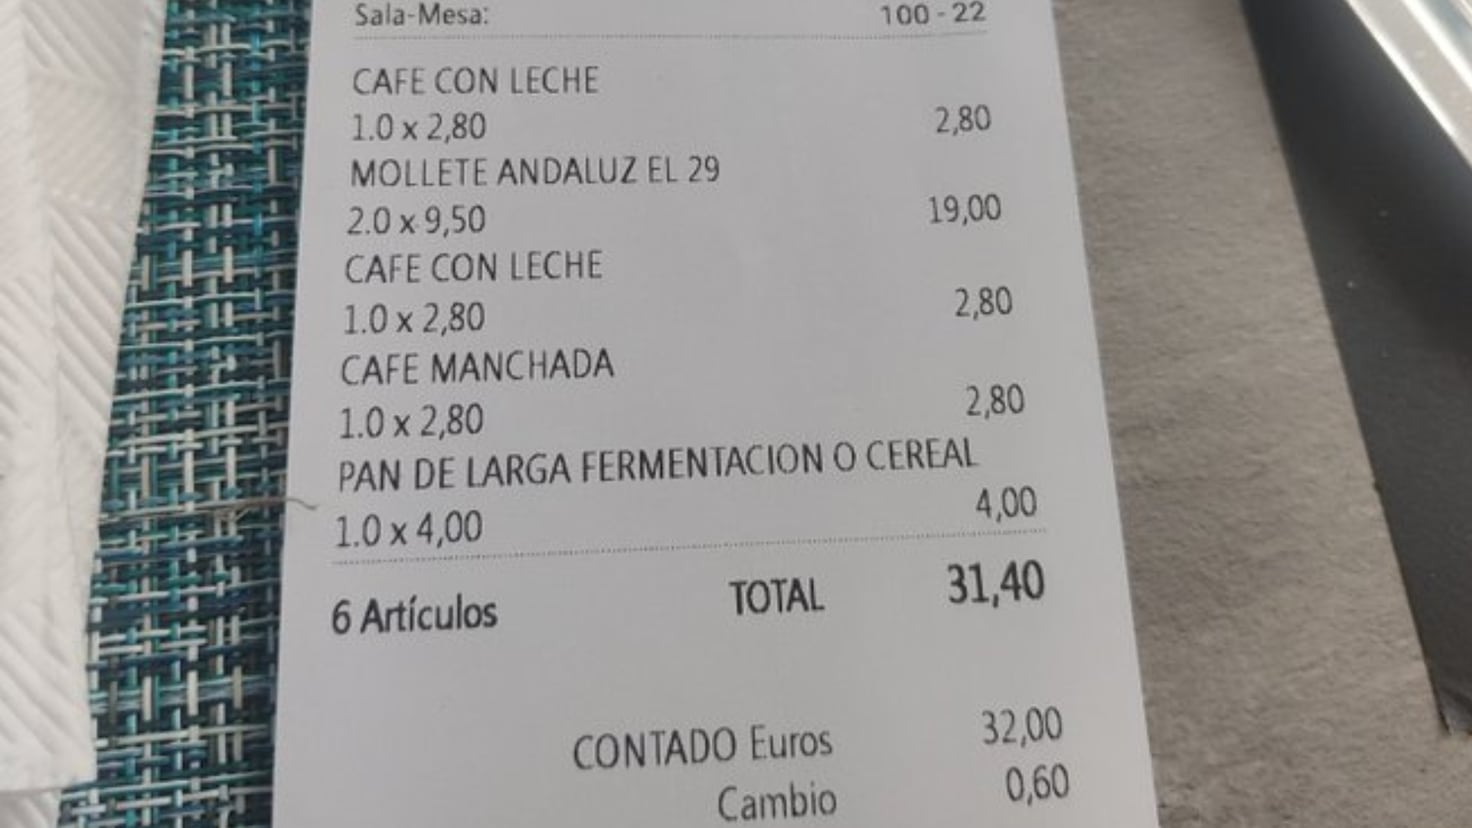 Outrage over the cost of a breakfast in Seville: The biggest scam in history
